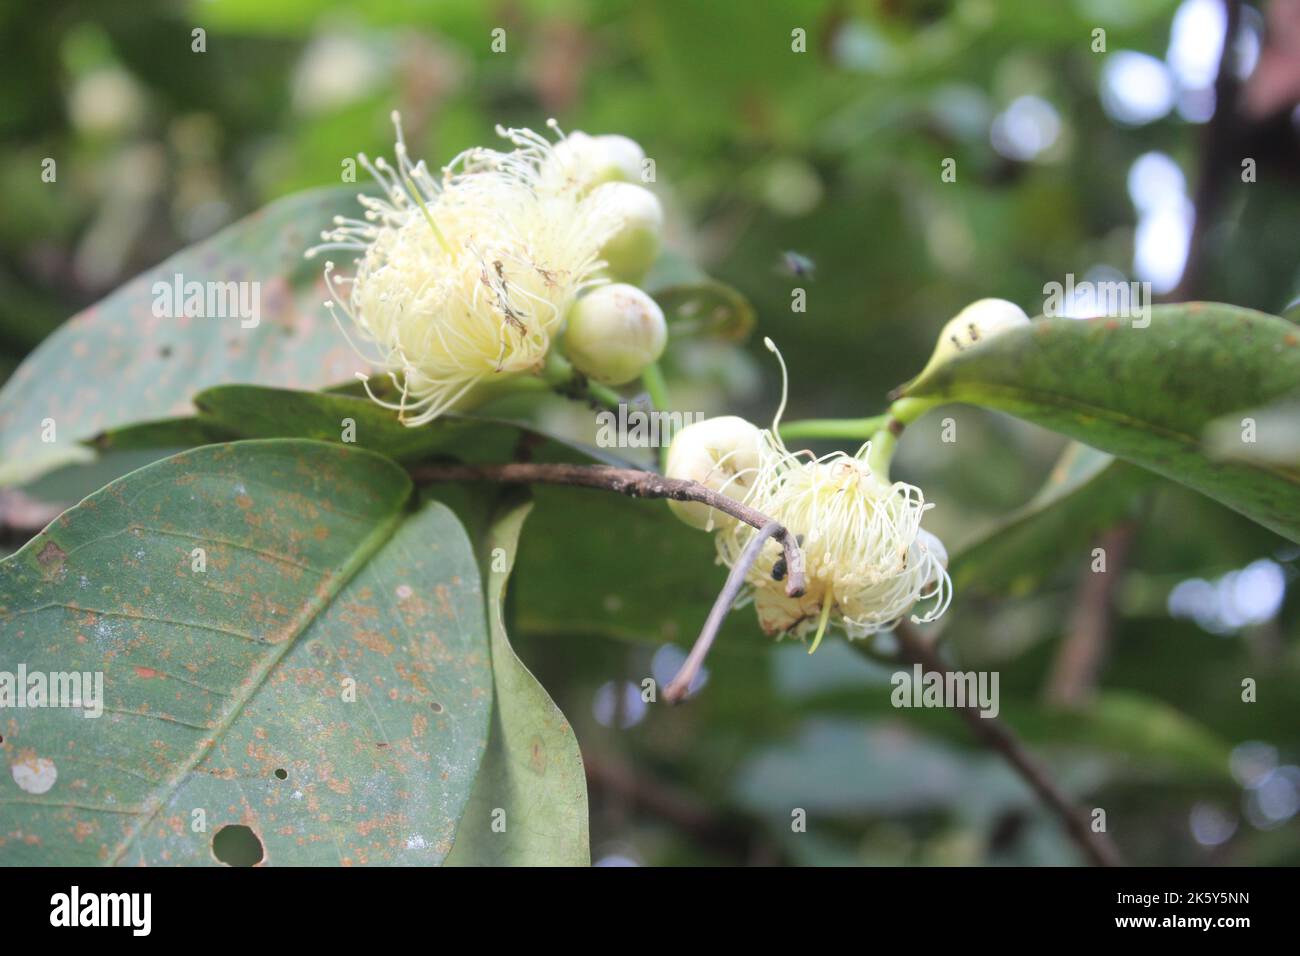 Close up of water guava with blurred background in the garden. Good for health because it contains lots of vitamins and nutrients. Stock Photo